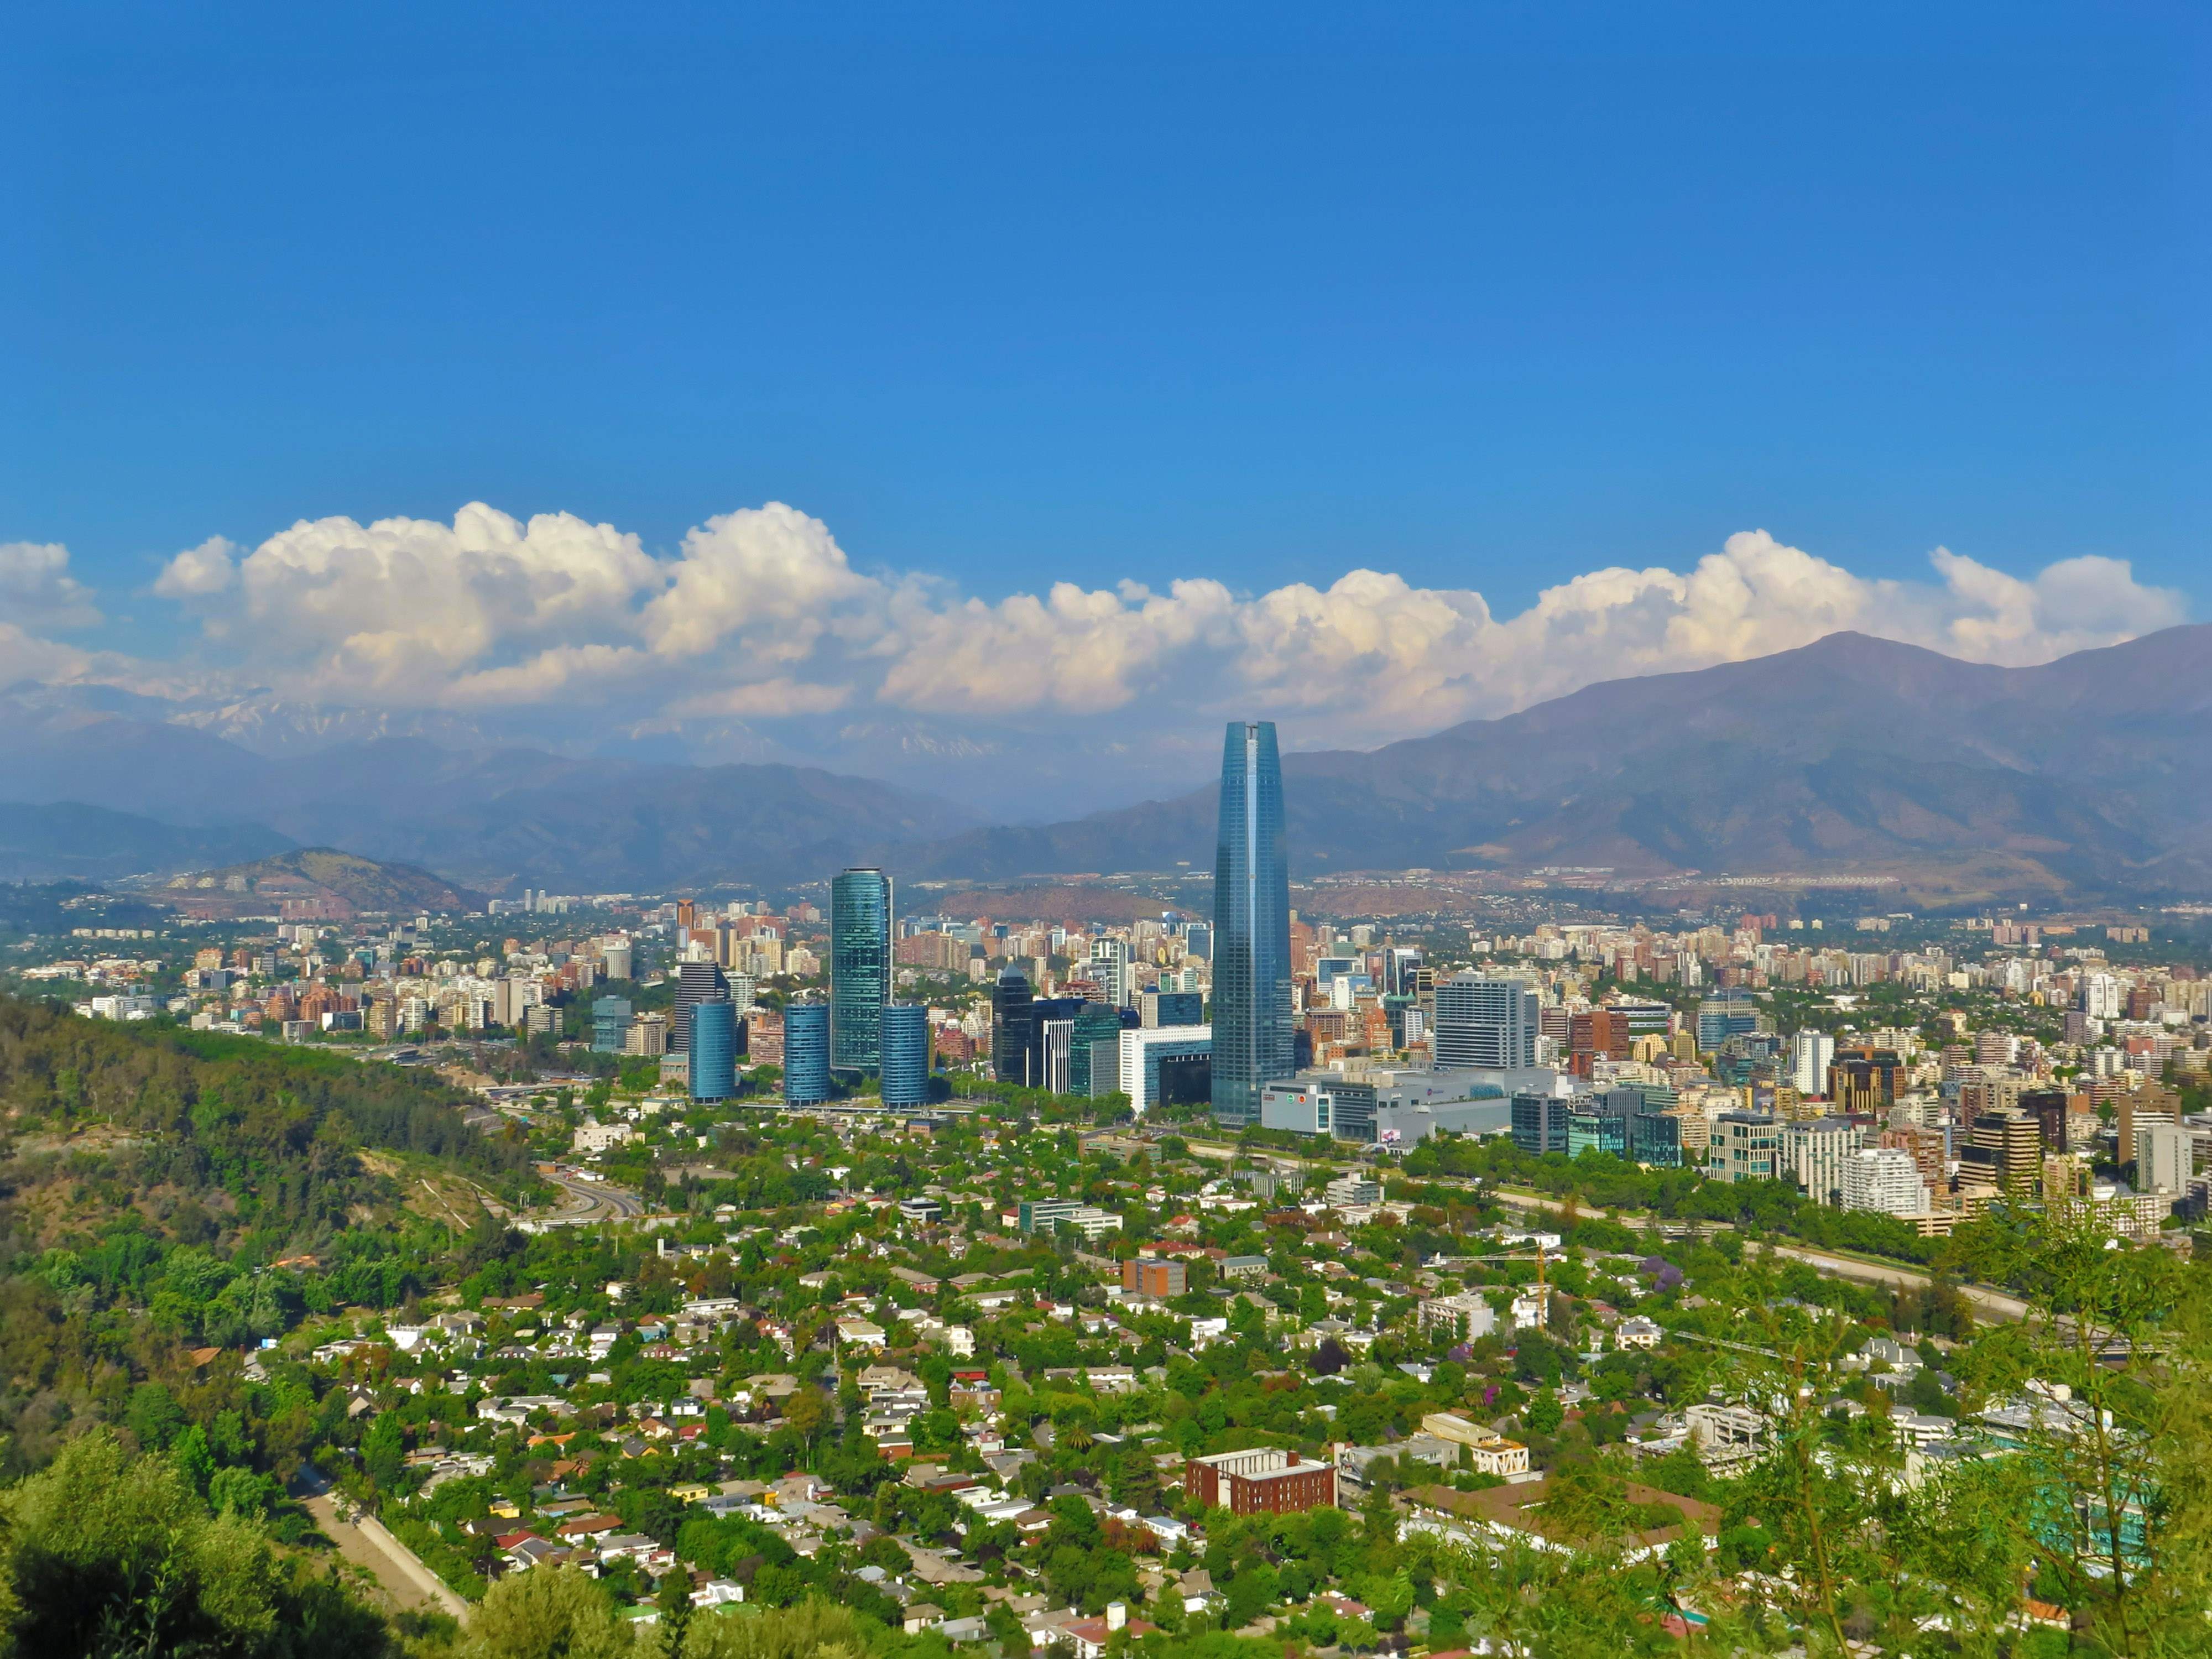 santiago-with-mountains-in-the-background-chile.jpg (1.87 MB)